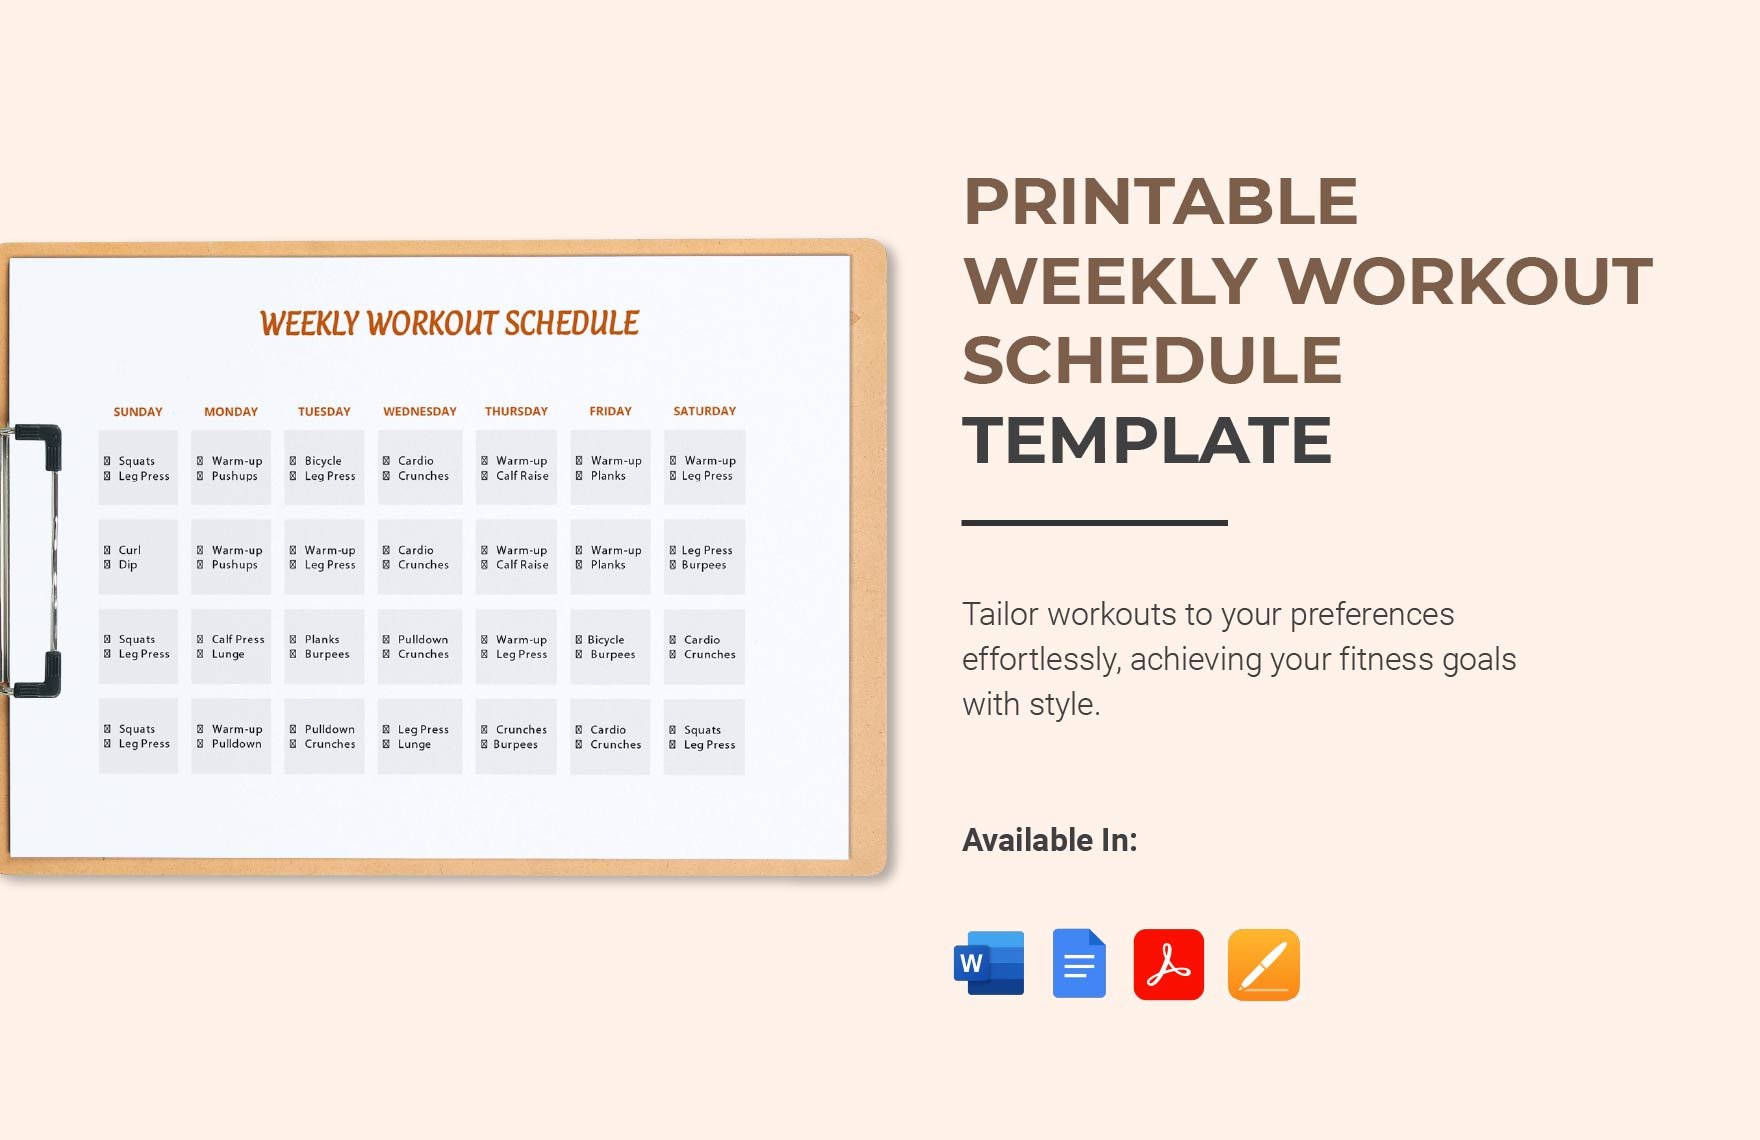 Printable Weekly Workout Schedule Template